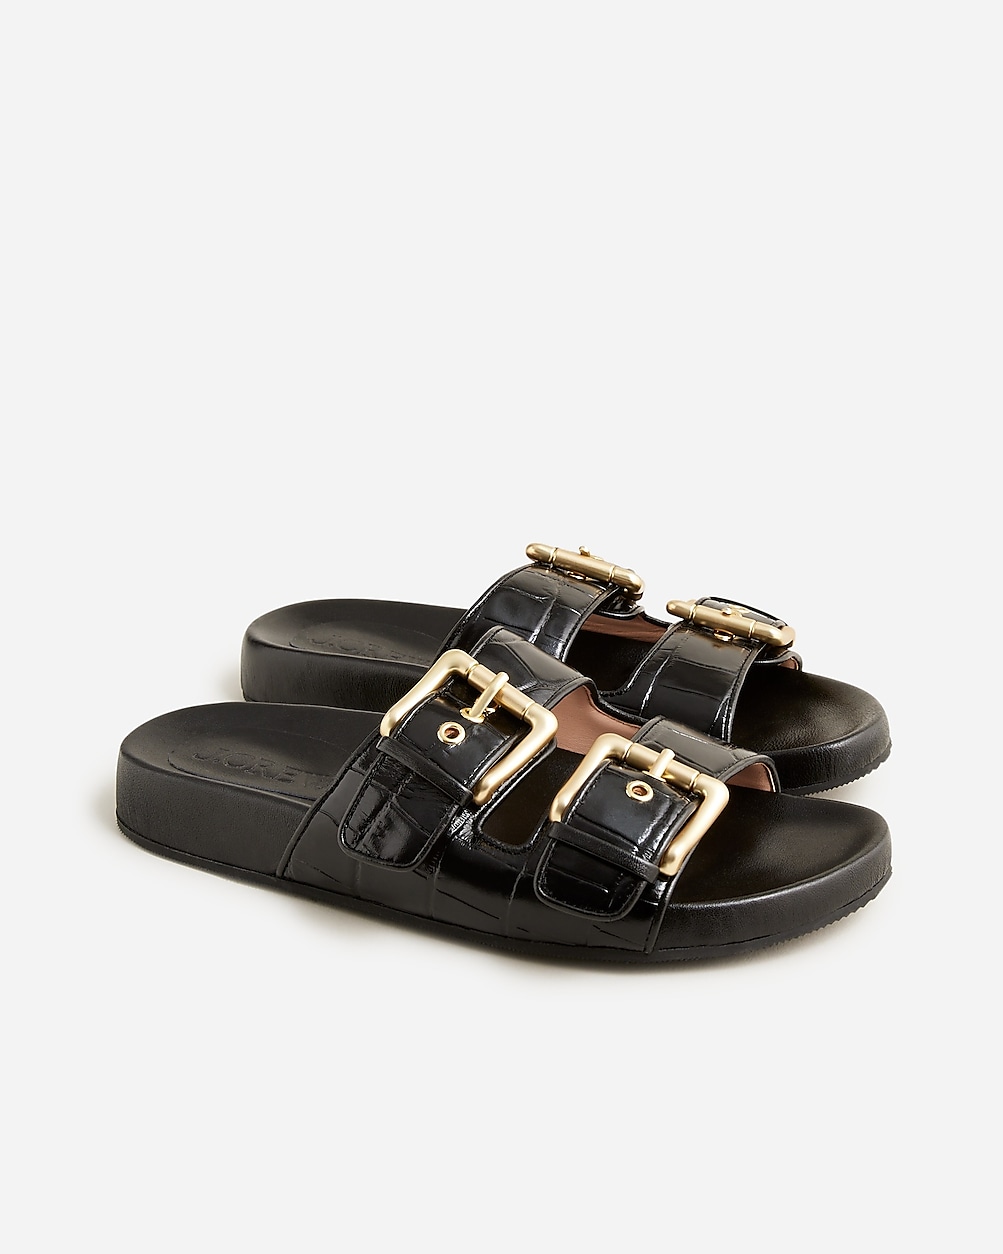 Marlow sandals in croc-embossed leather